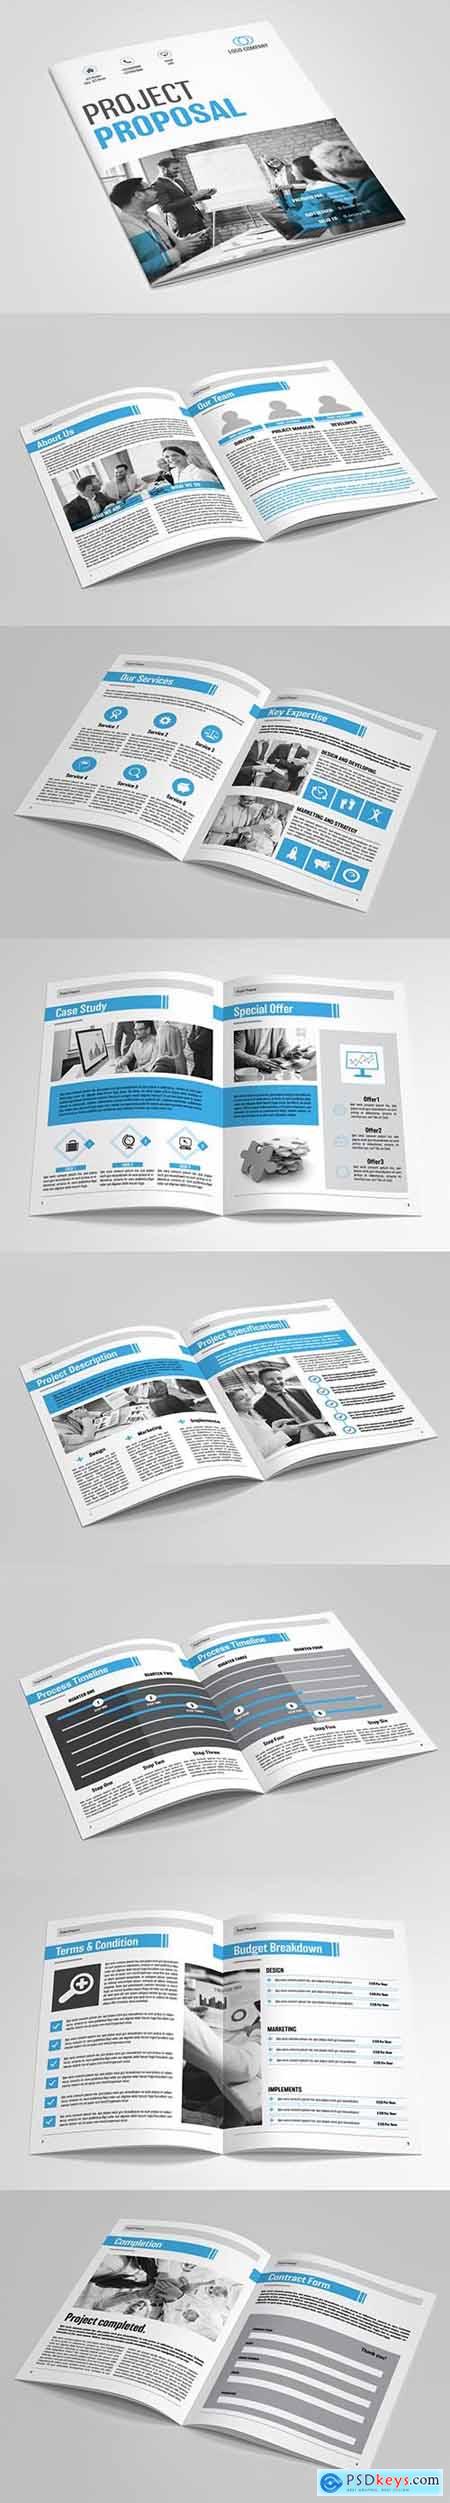 Business Proposal Layout with Blue Accents 181532603